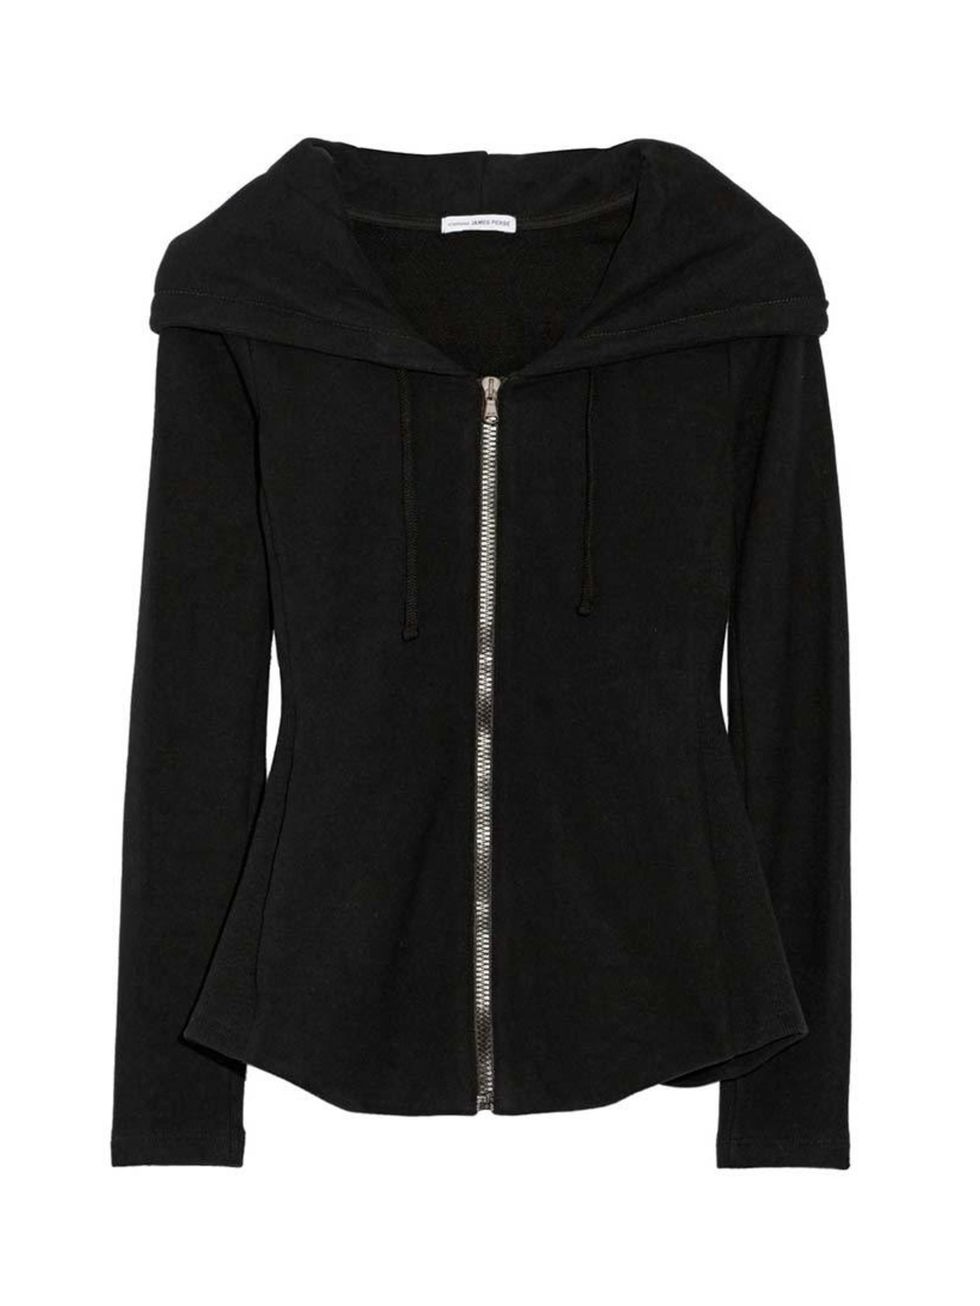 <p><a href="http://www.net-a-porter.com/product/501122/James_Perse/cotton-french-terry-hooded-top" target="_blank">James Perse</a>, £265 at Net-a-Porter.</p>